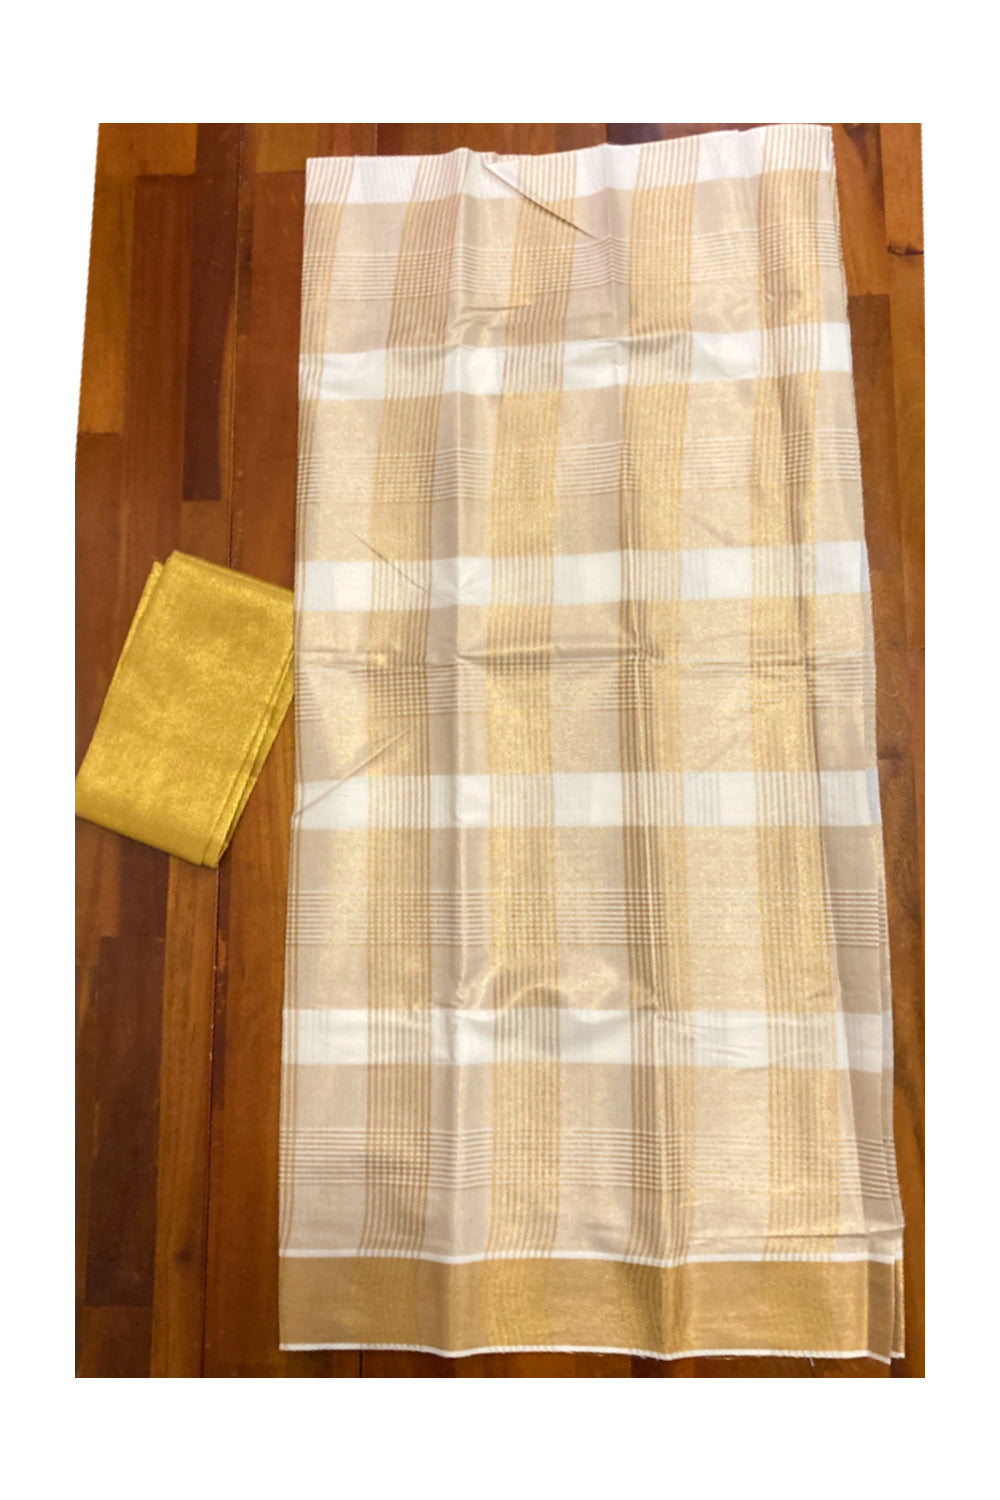 Kerala Cotton Kasavu Woven Pavada and Blouse Tissue Material for Kids 3 Meters